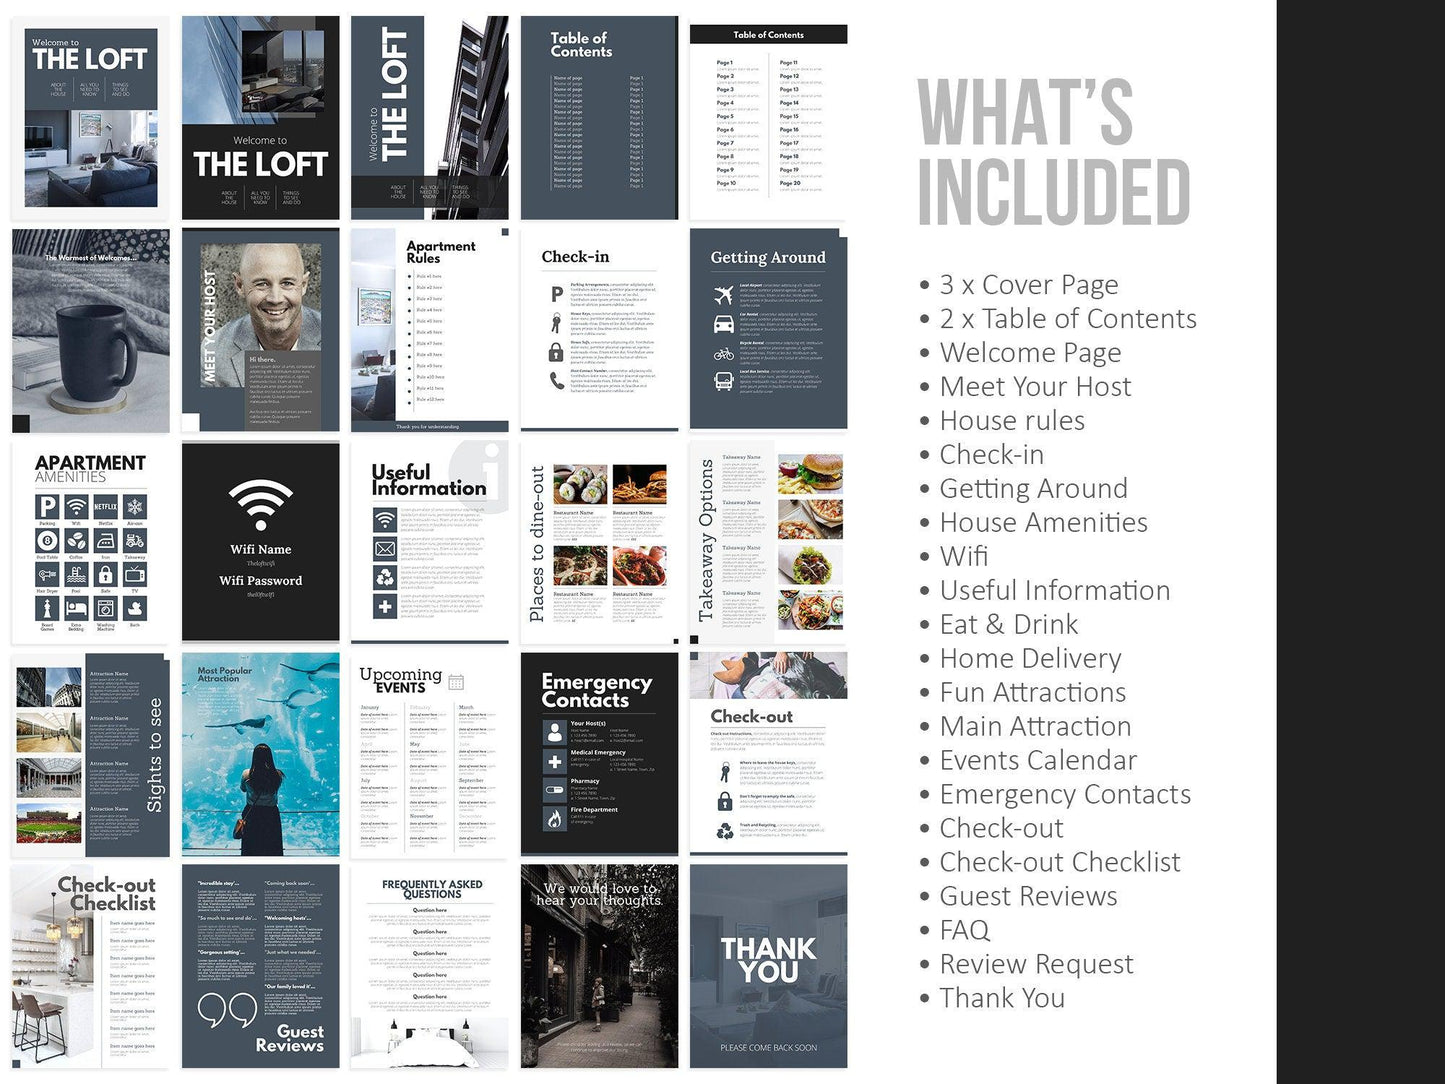 Airbnb Host Welcome Book Template (City)